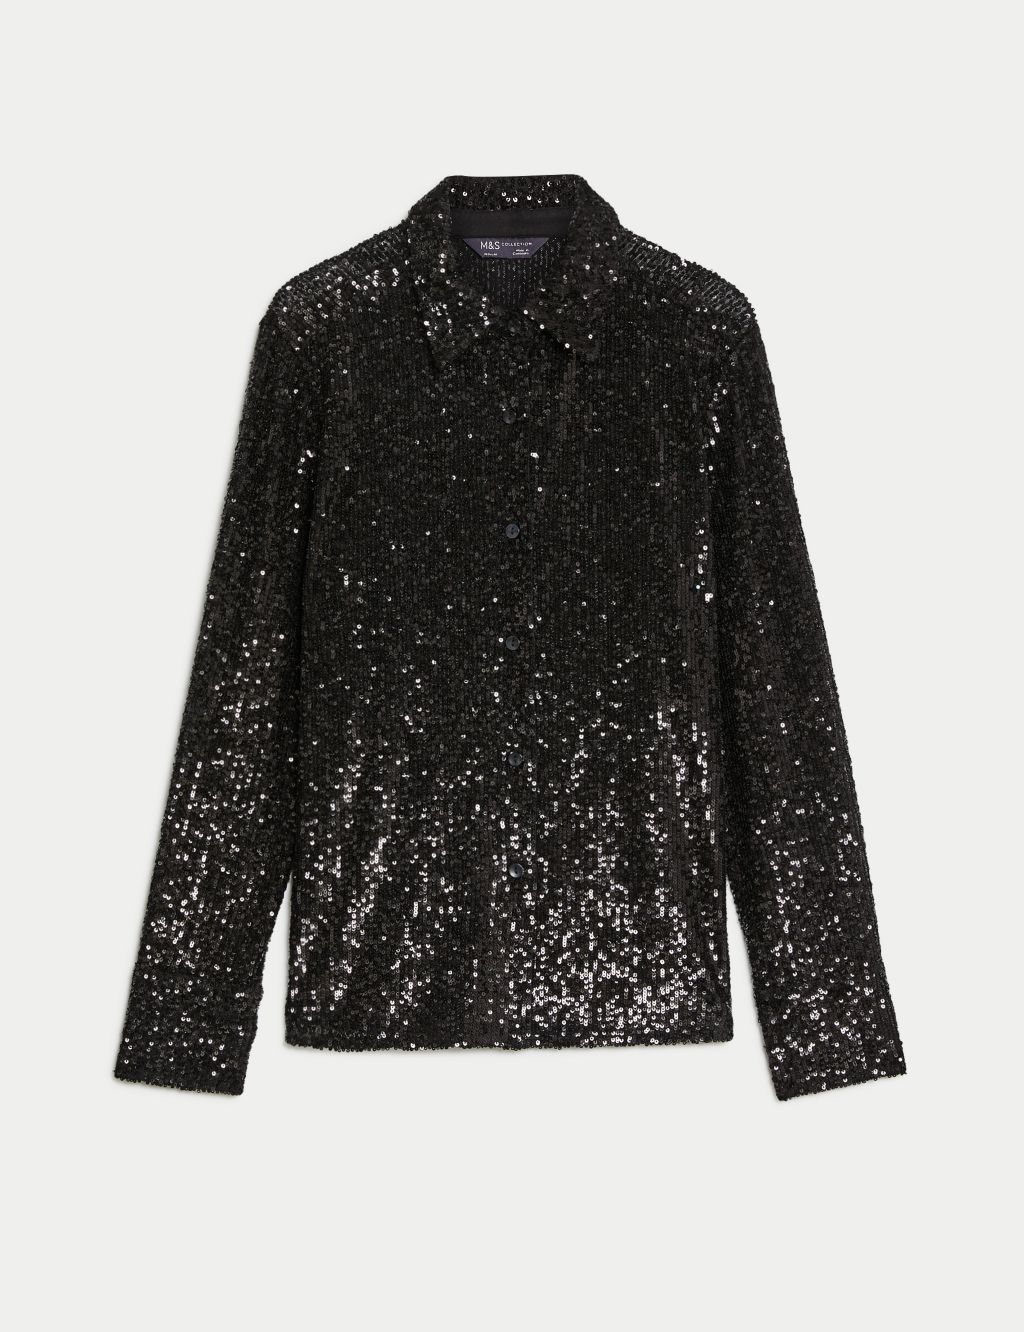 Sequin Collared Shirt image 2